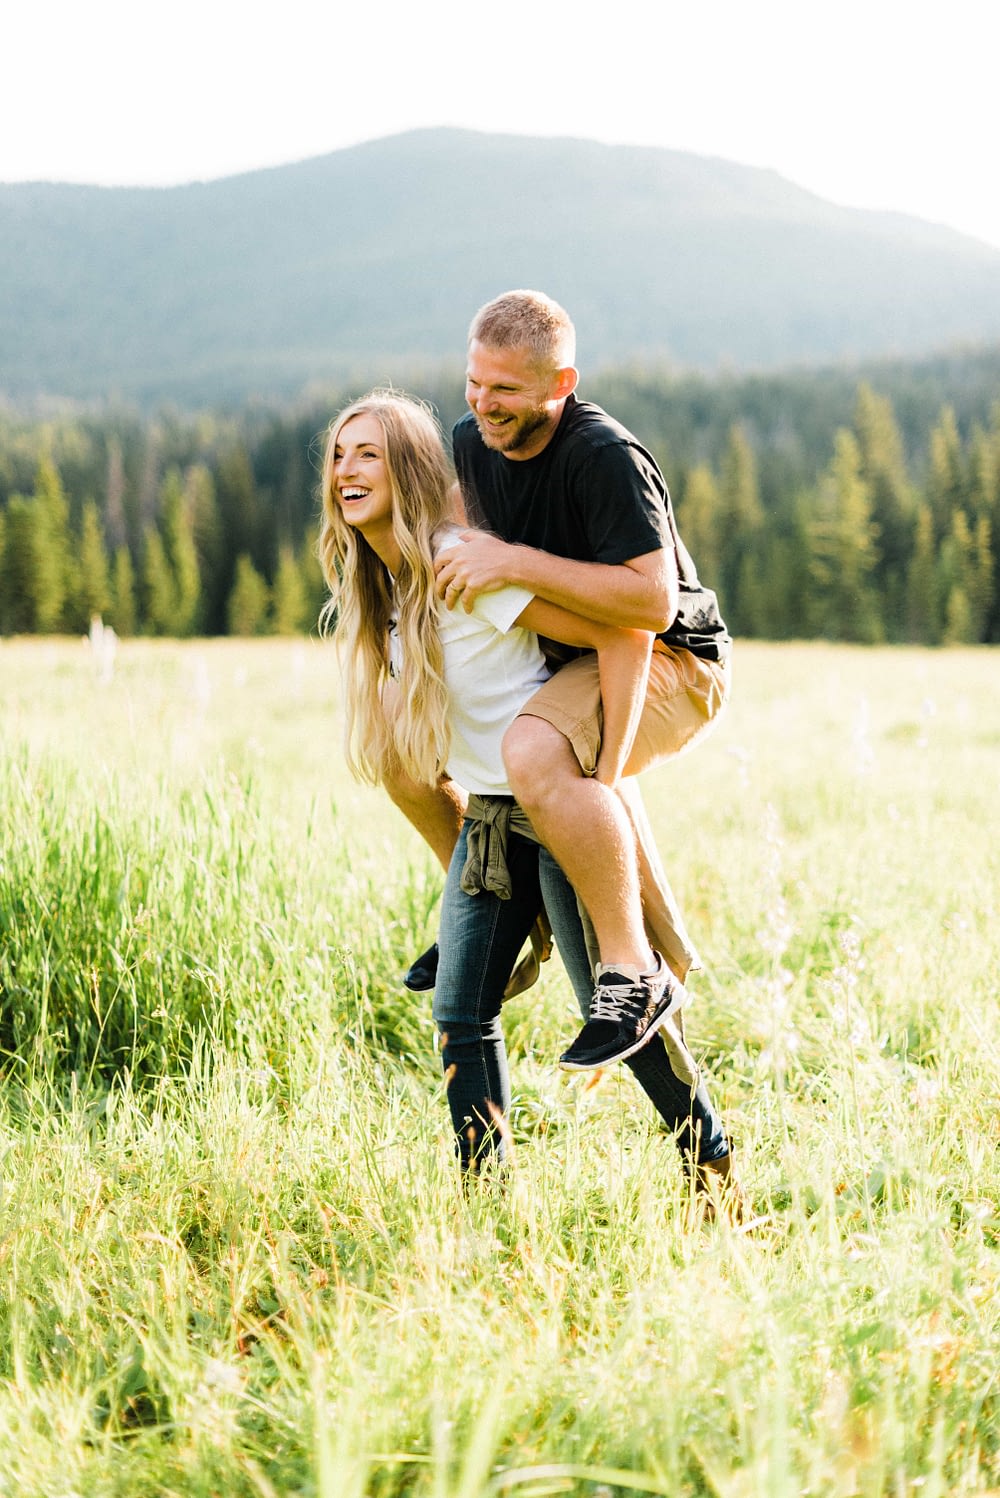 Blonde girl giving husband a piggy back ride in the mountains while both laugh